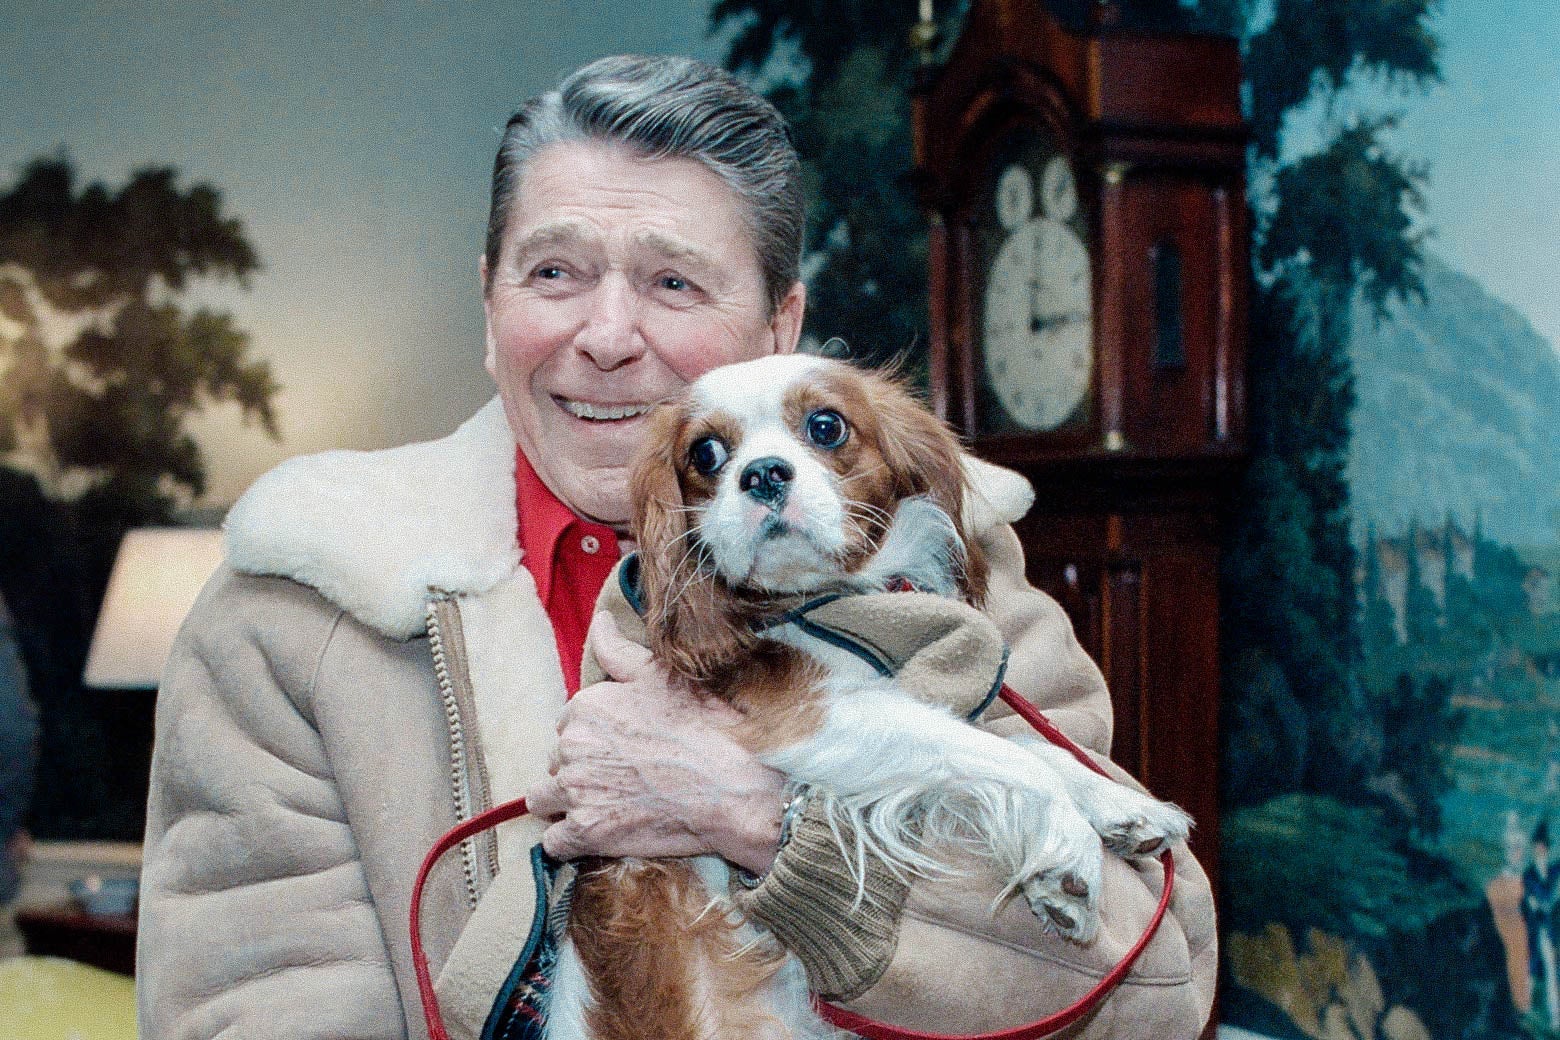 Ronald Reagan, grinning, in a tan jacket, holds an alarmed looking dog.